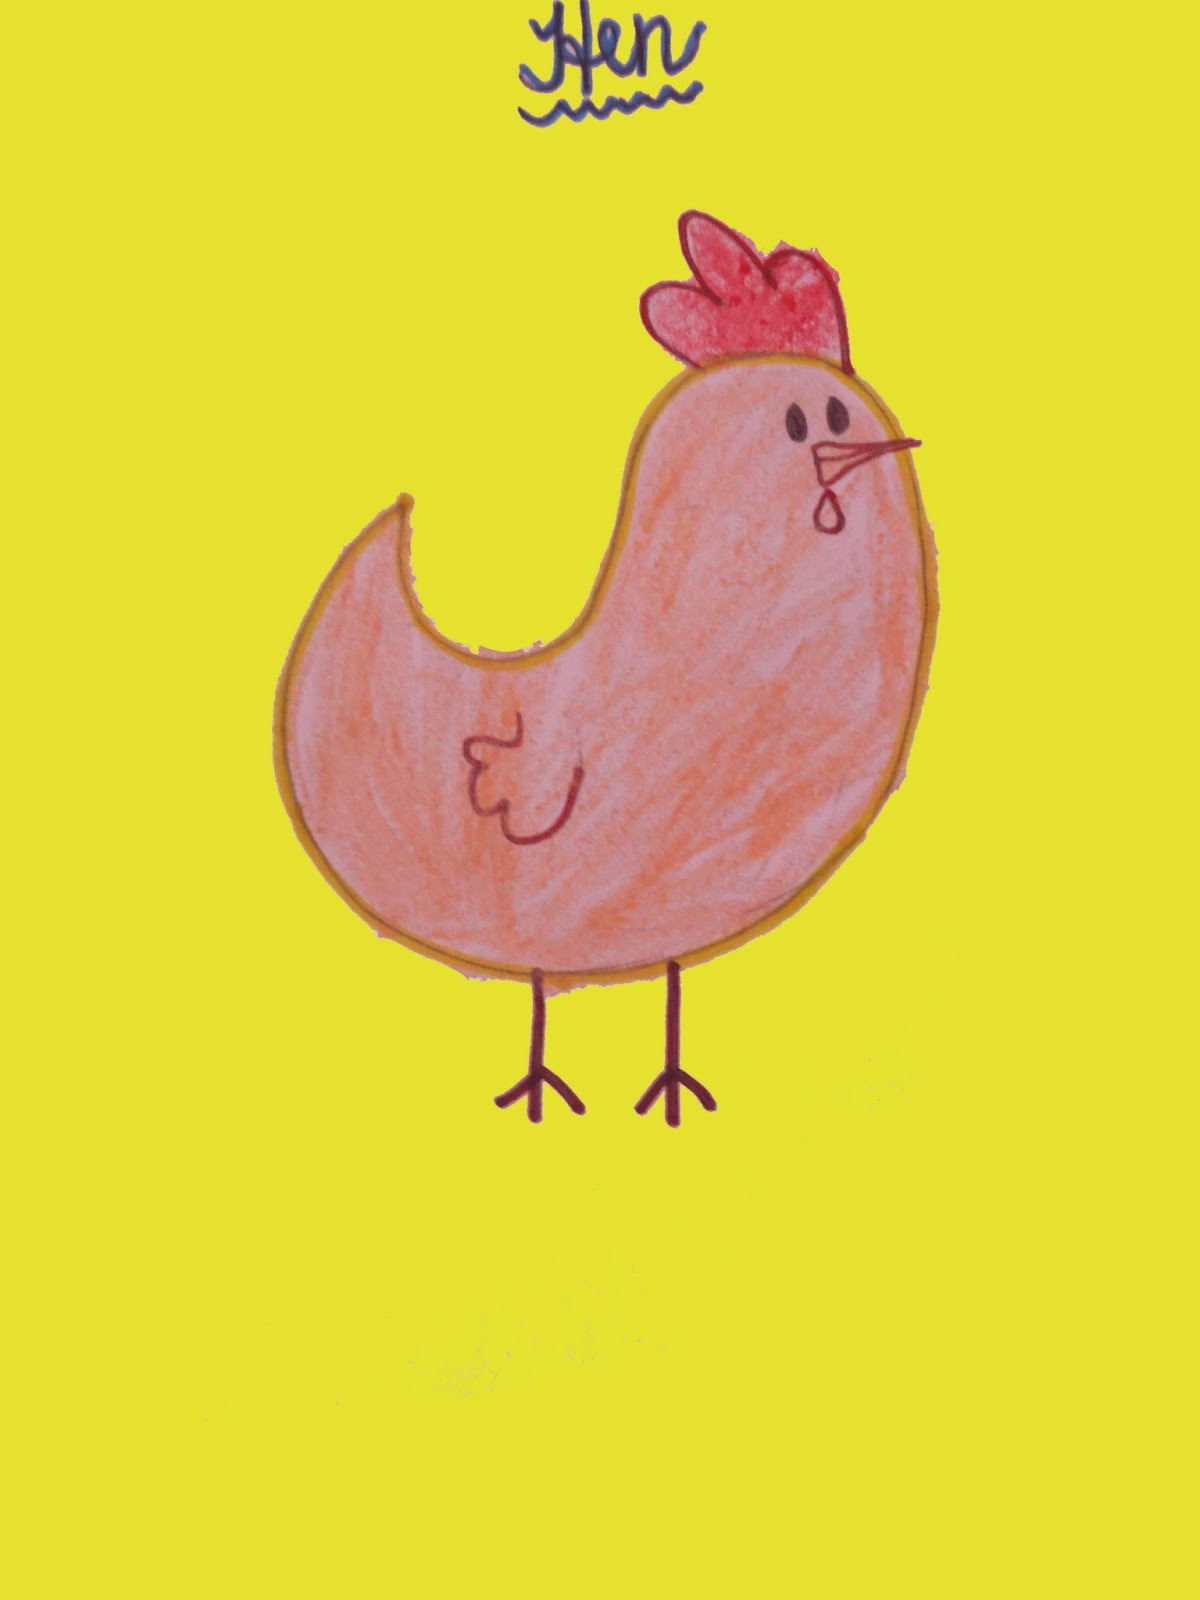 Chicken Drawing Step By Step Carinewbi I like to paint and draw and make funny and cute characters. chicken drawing step by step carinewbi